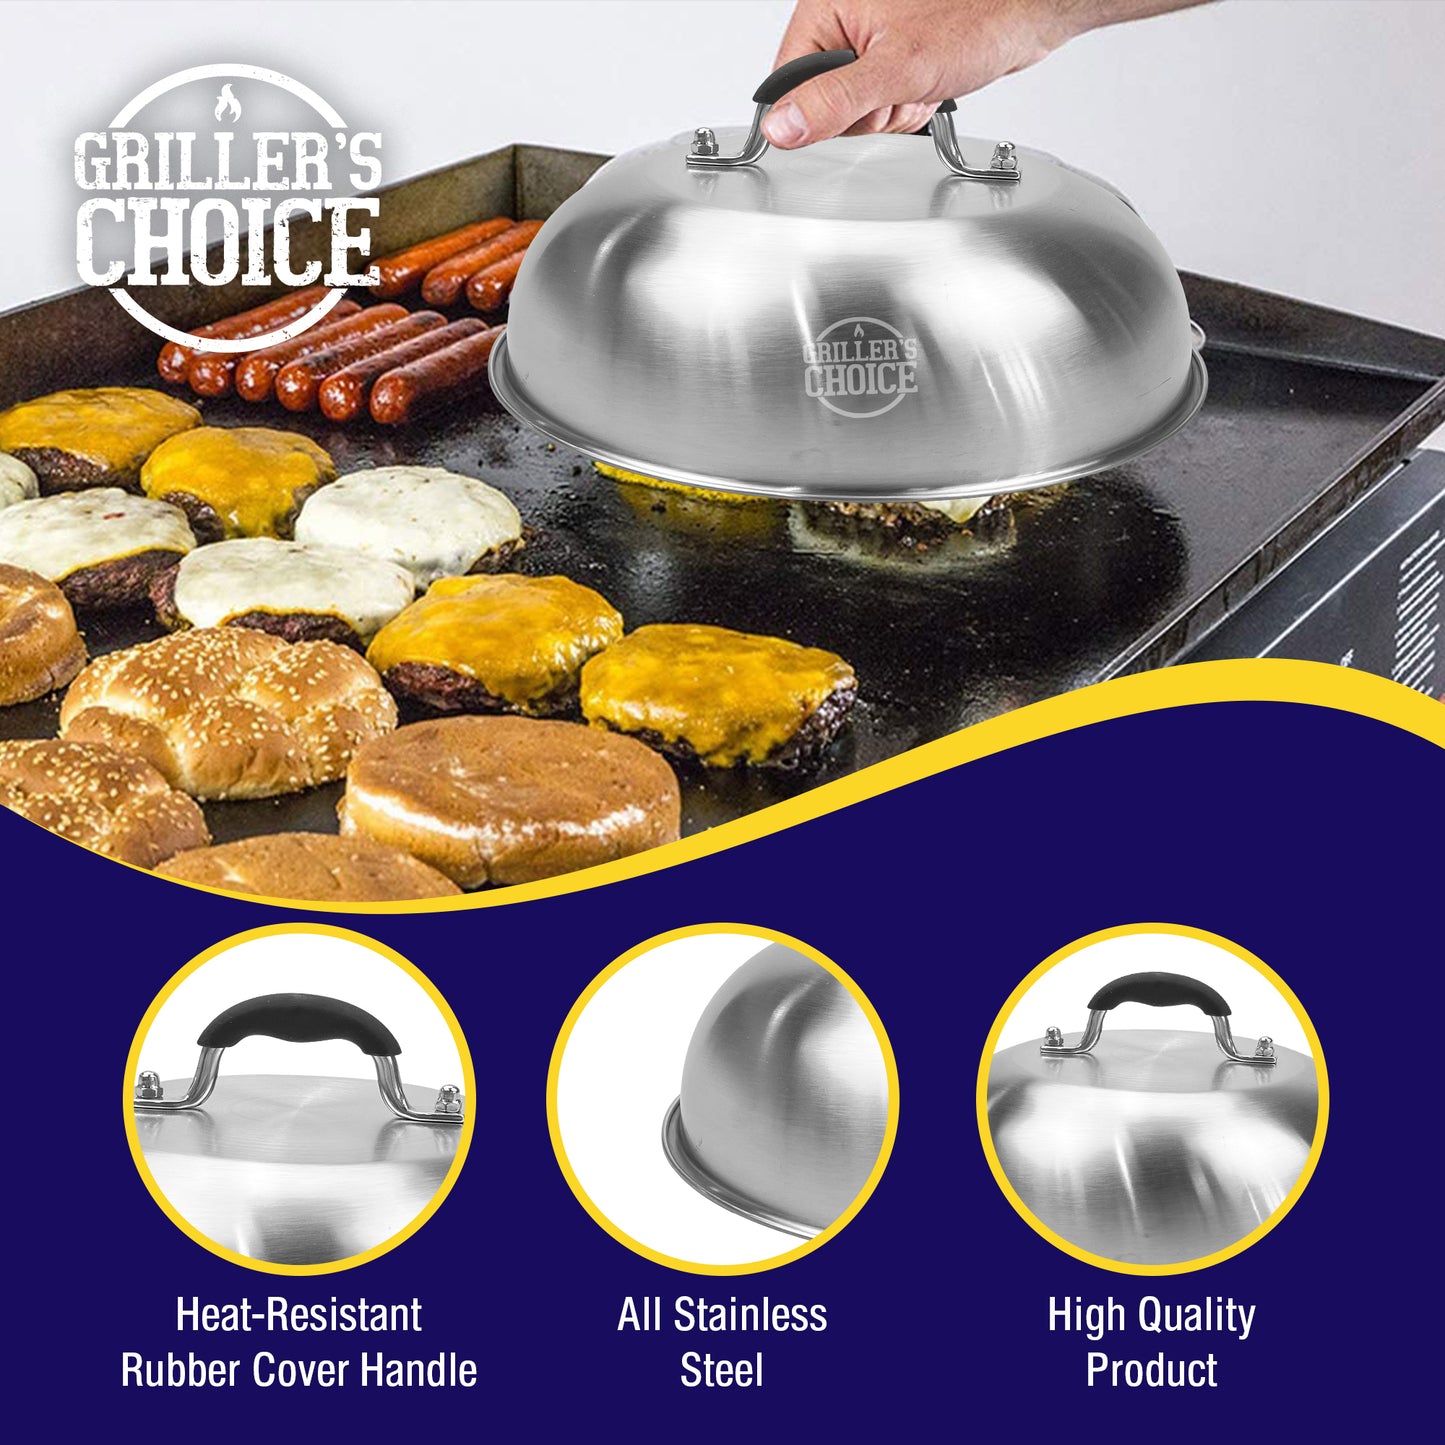 Grillers Choice Smashburger Press and Griddle Dome Cover- Durable Cast Iron Round Burger Press, Stainless Steel Dome for Grillers, Cooks and Camping, Ideal Bacon Press for Griddle Grill, Melting Dome